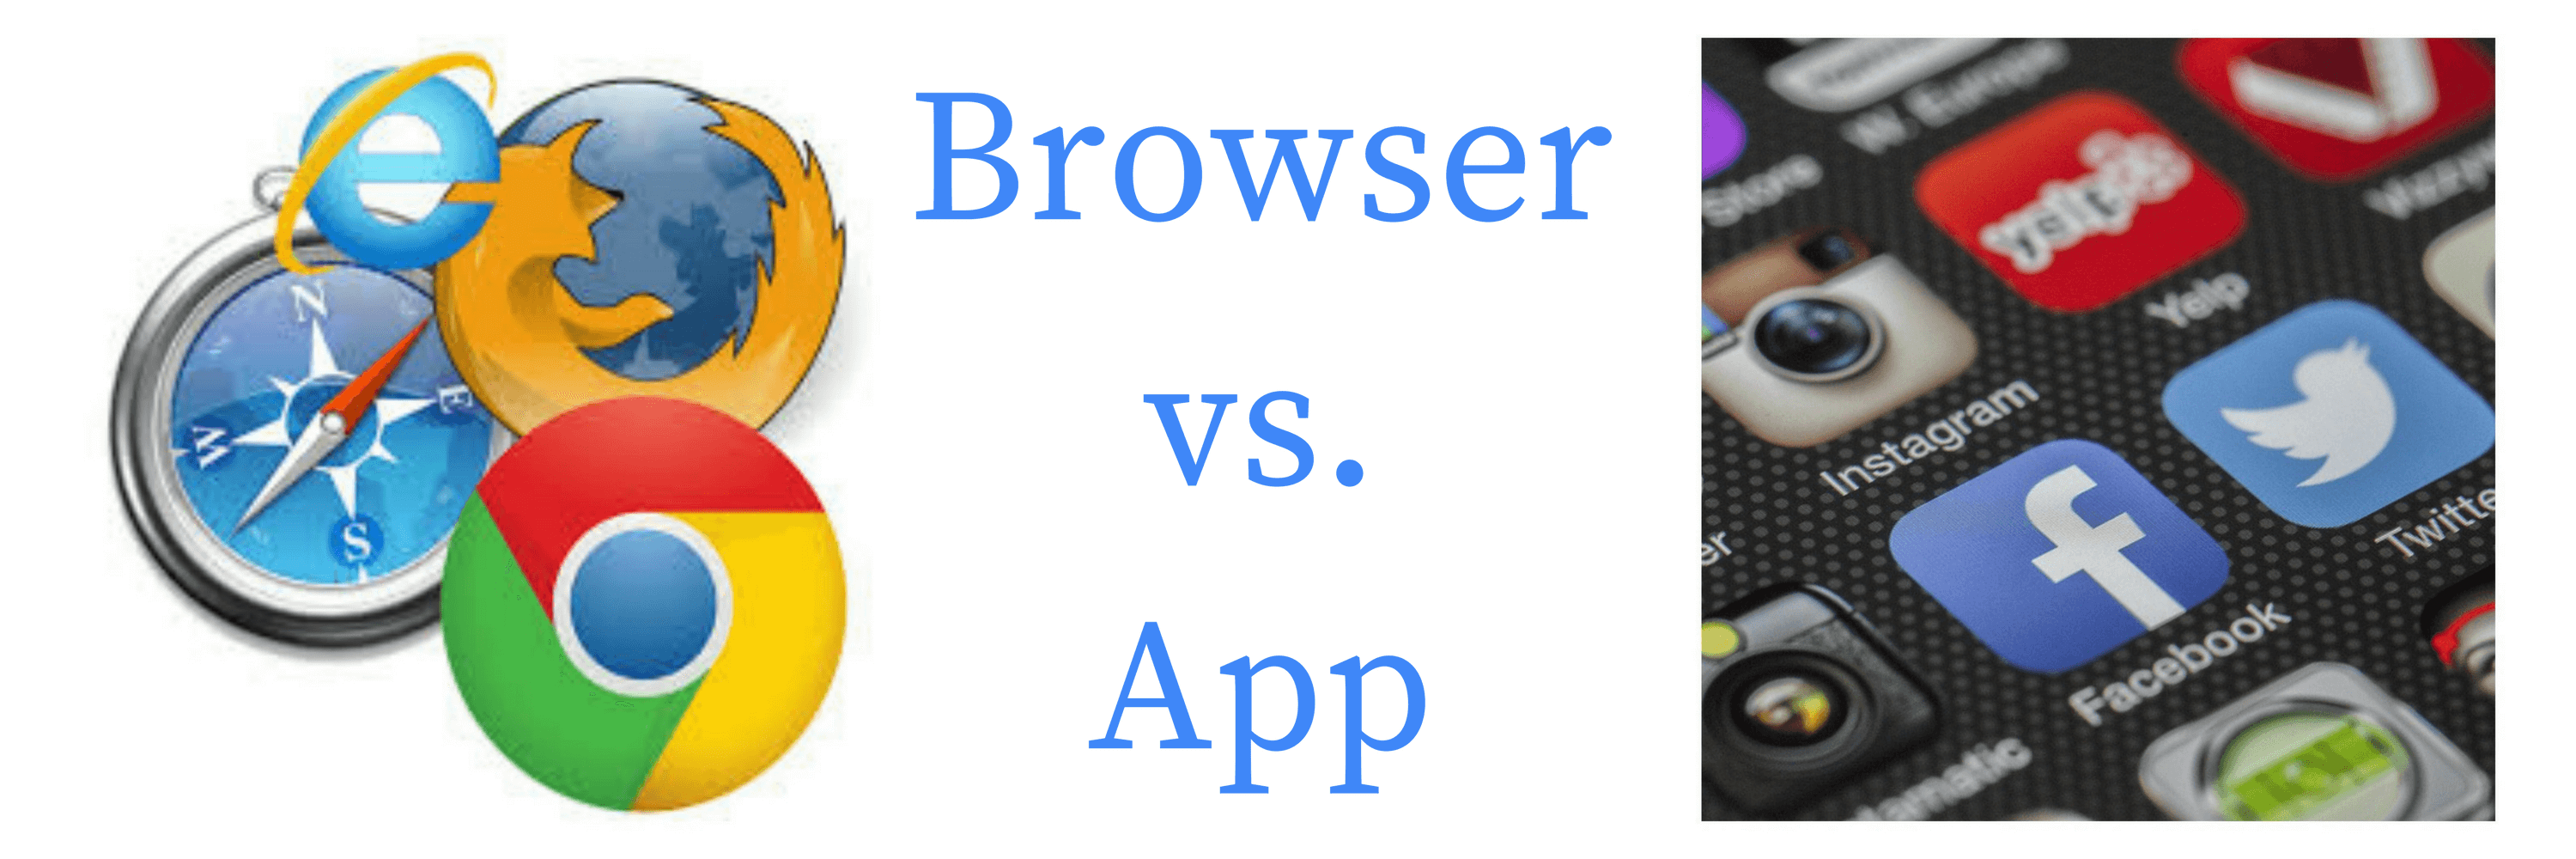 web browser logos and screenshot of phone apps